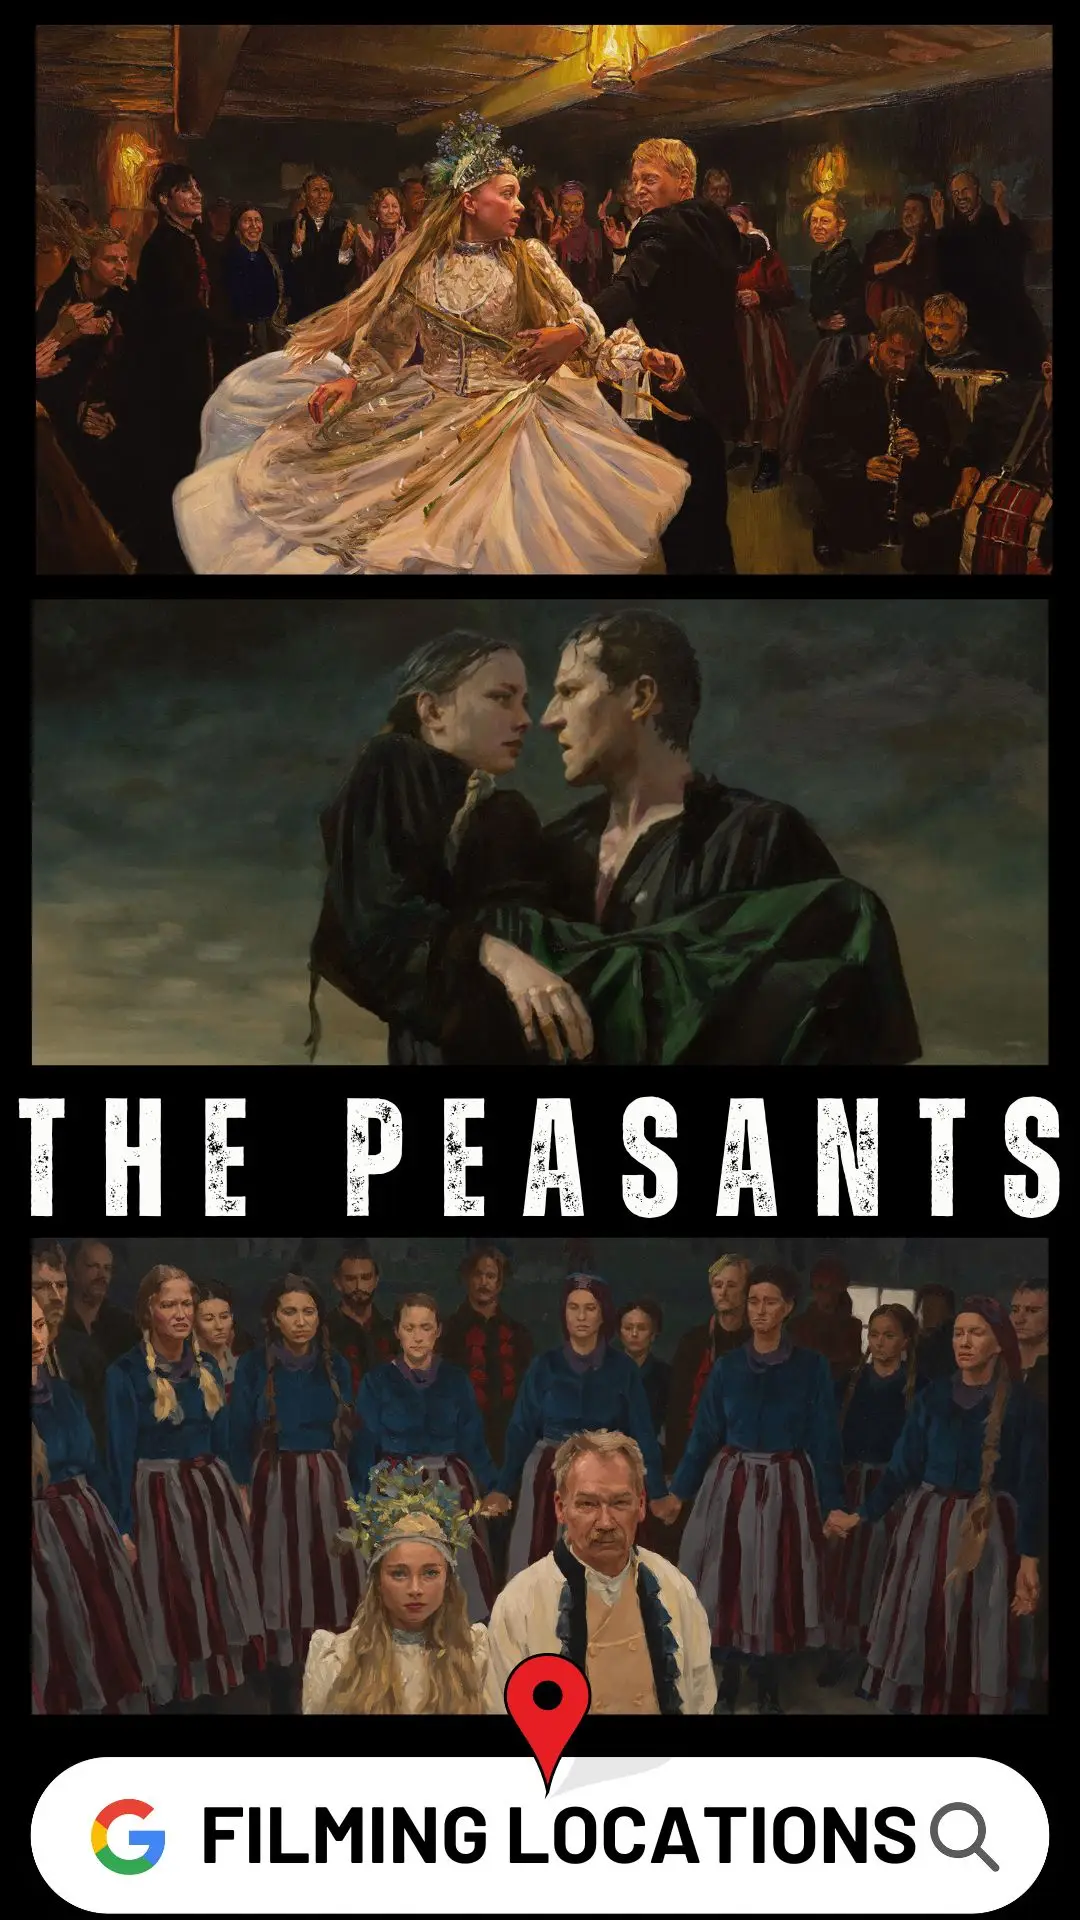 The Peasants Filming Locations